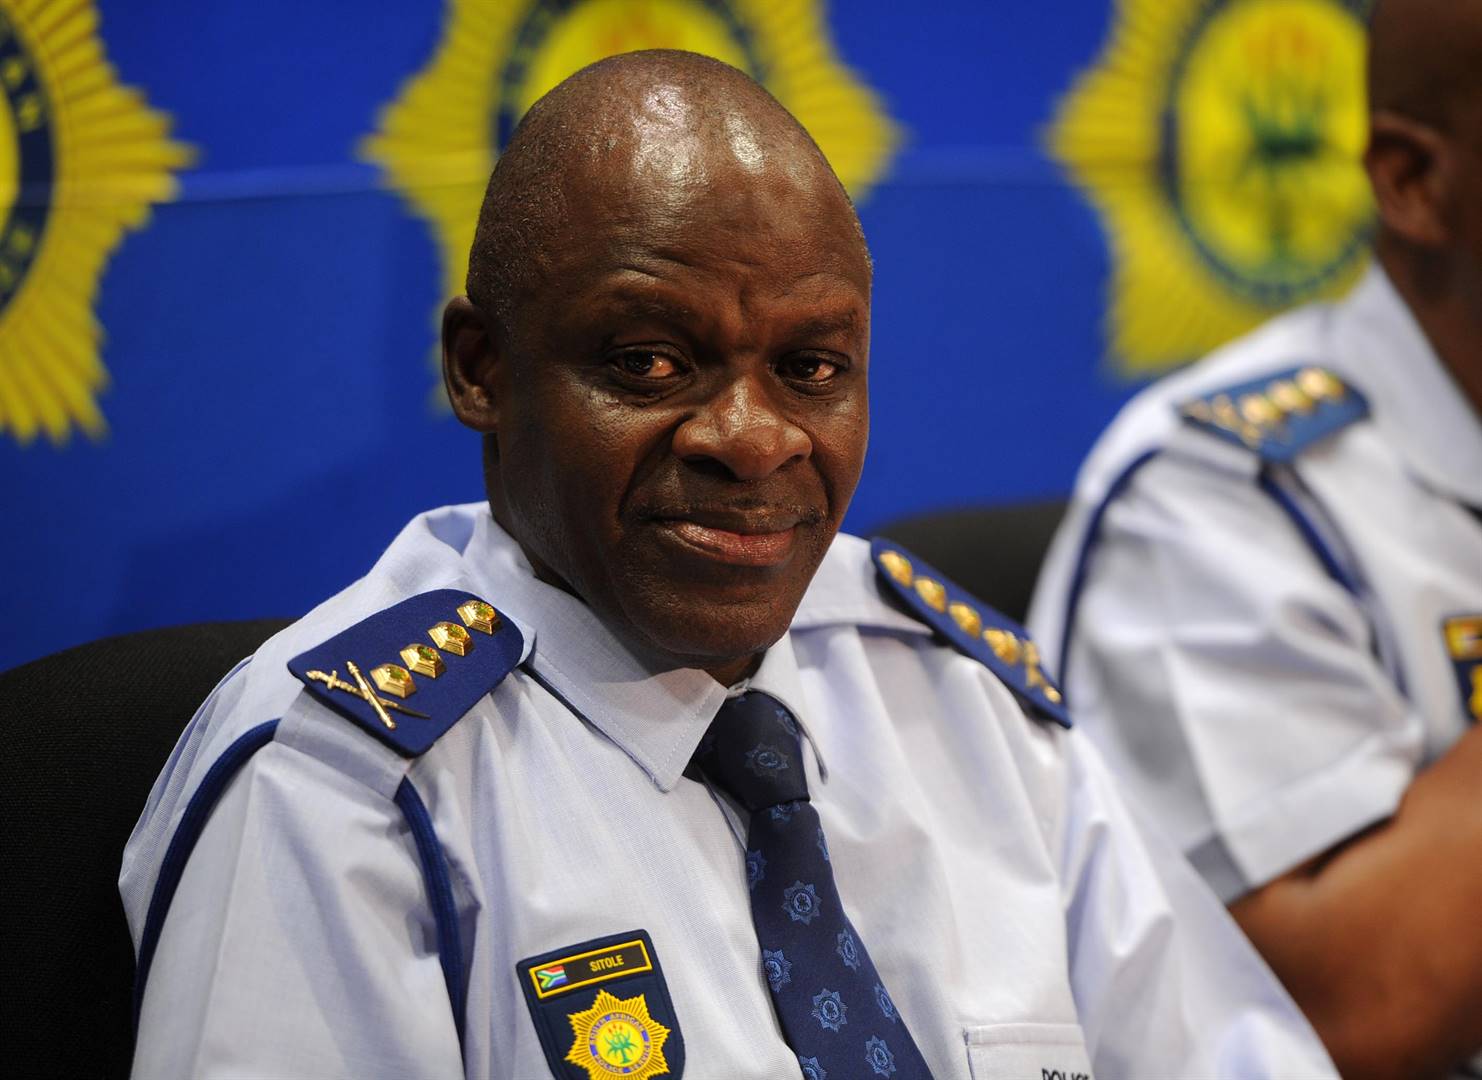 SAPS commissioner General Khehla Sitole has called for more police officers following the July unrest.